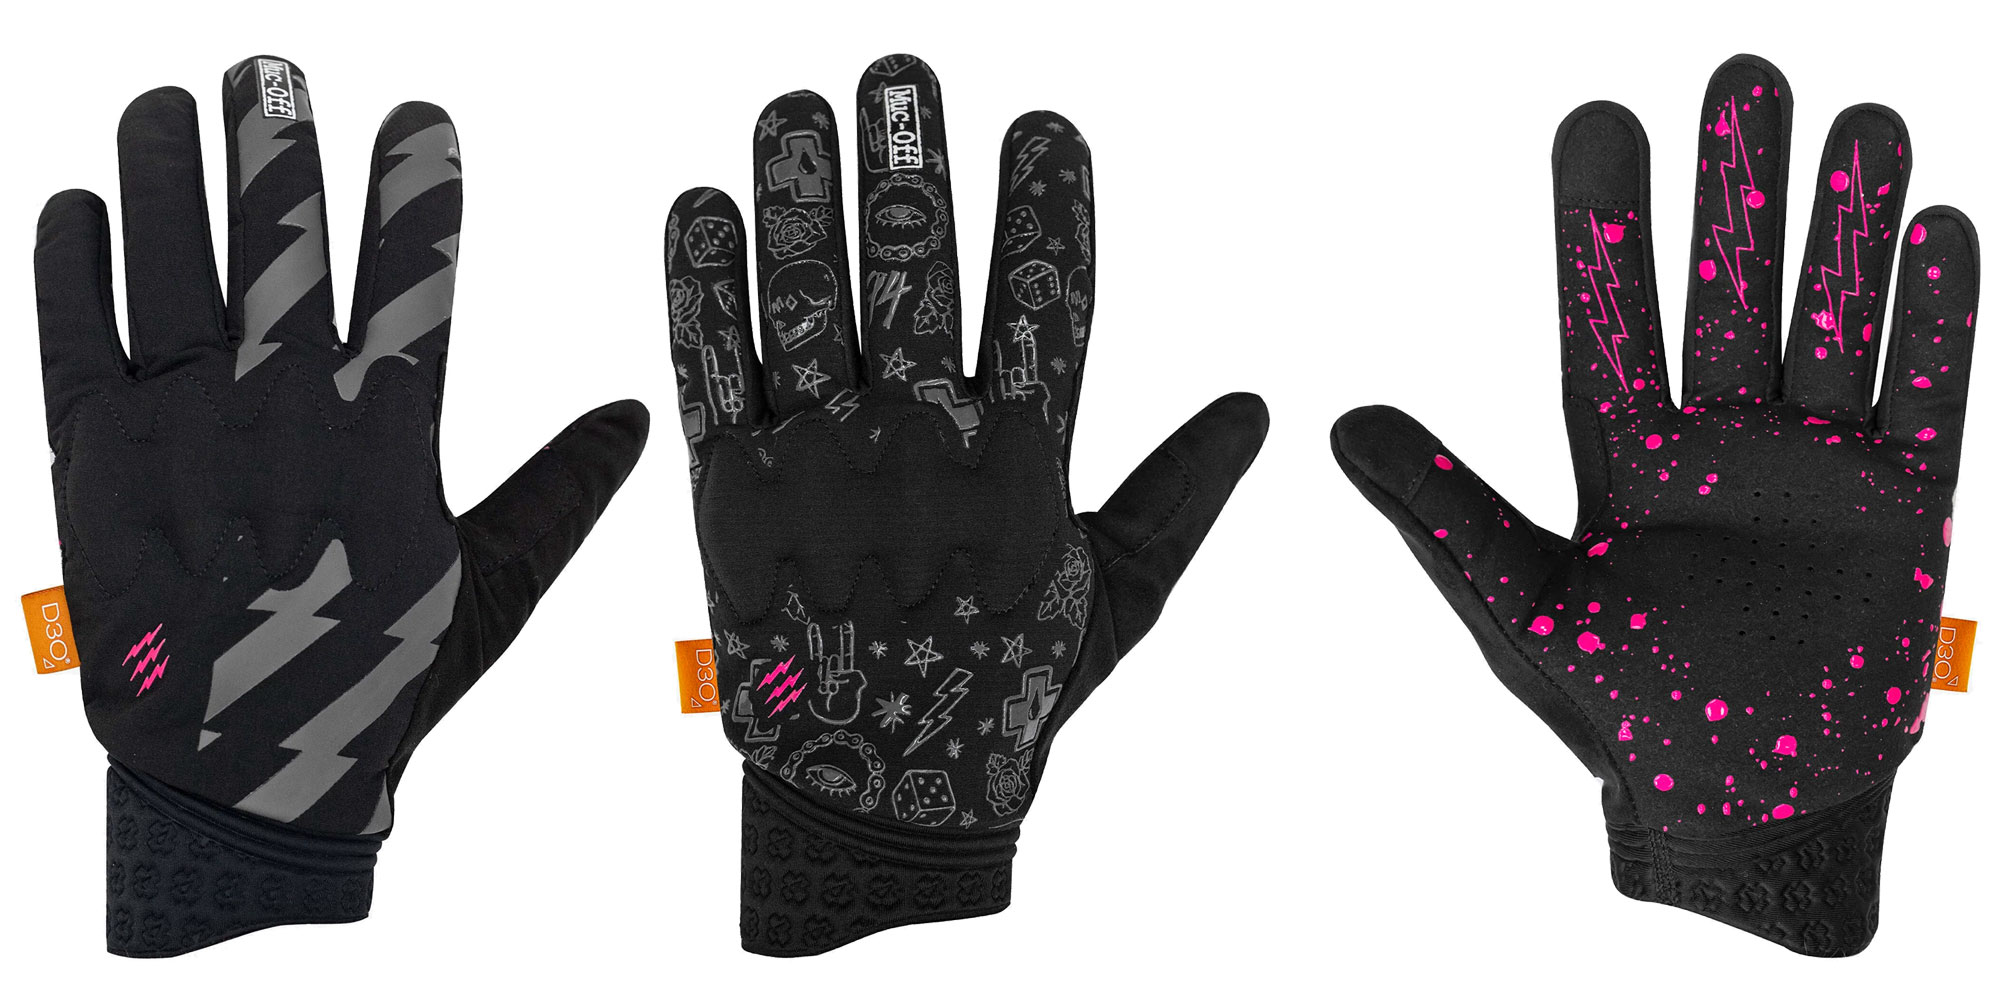 Muc-Off D3O Rider Gloves deliver impact protection for aggressive mountain biking, colors